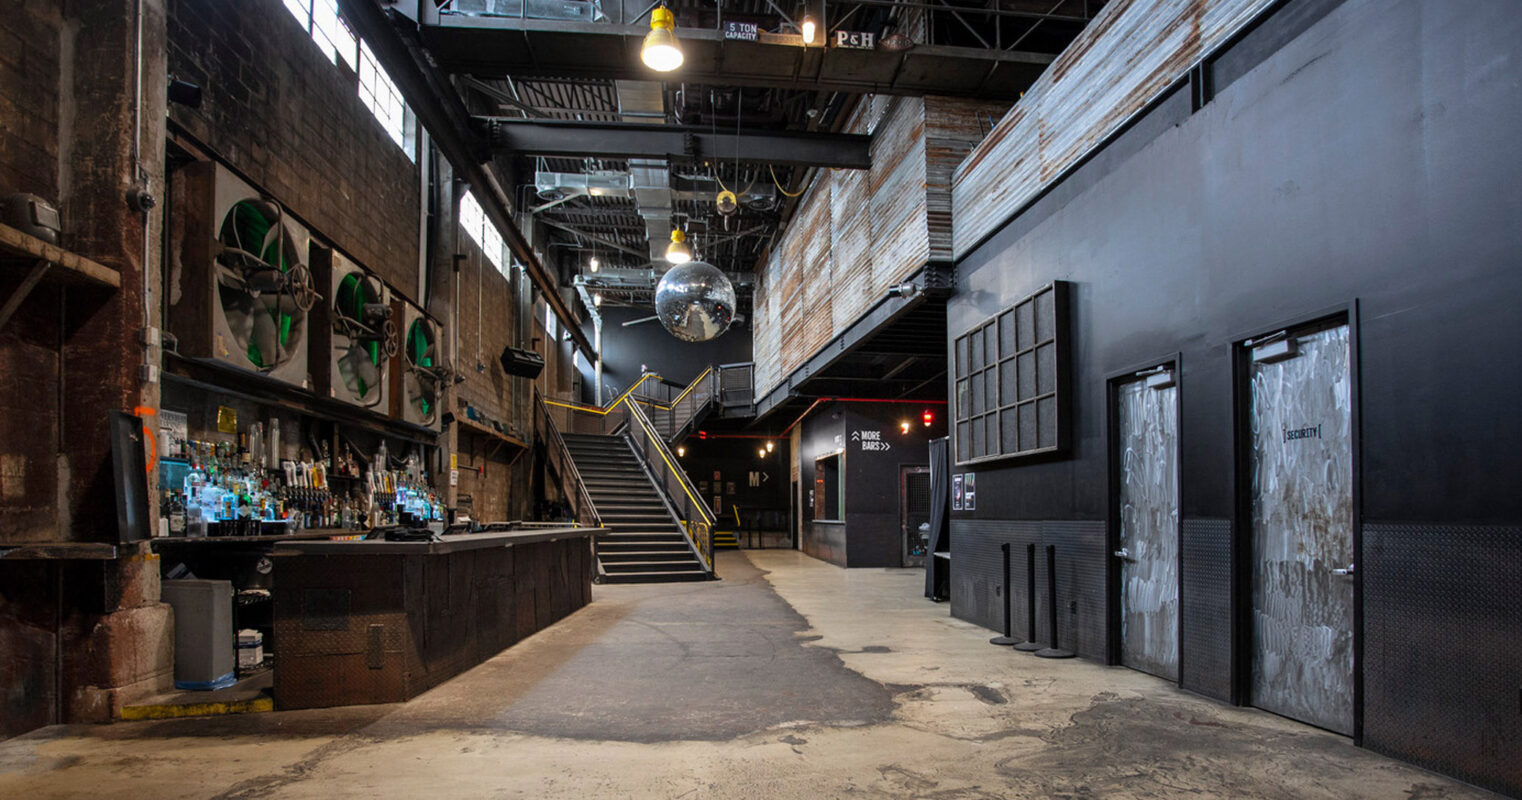 Spacious industrial-style venue featuring exposed brick walls, steel beams, and a bar area with eclectic bottle display. A staircase with metal railings ascends to a mezzanine level, underlining the venue’s multi-functional layout and urban aesthetic.